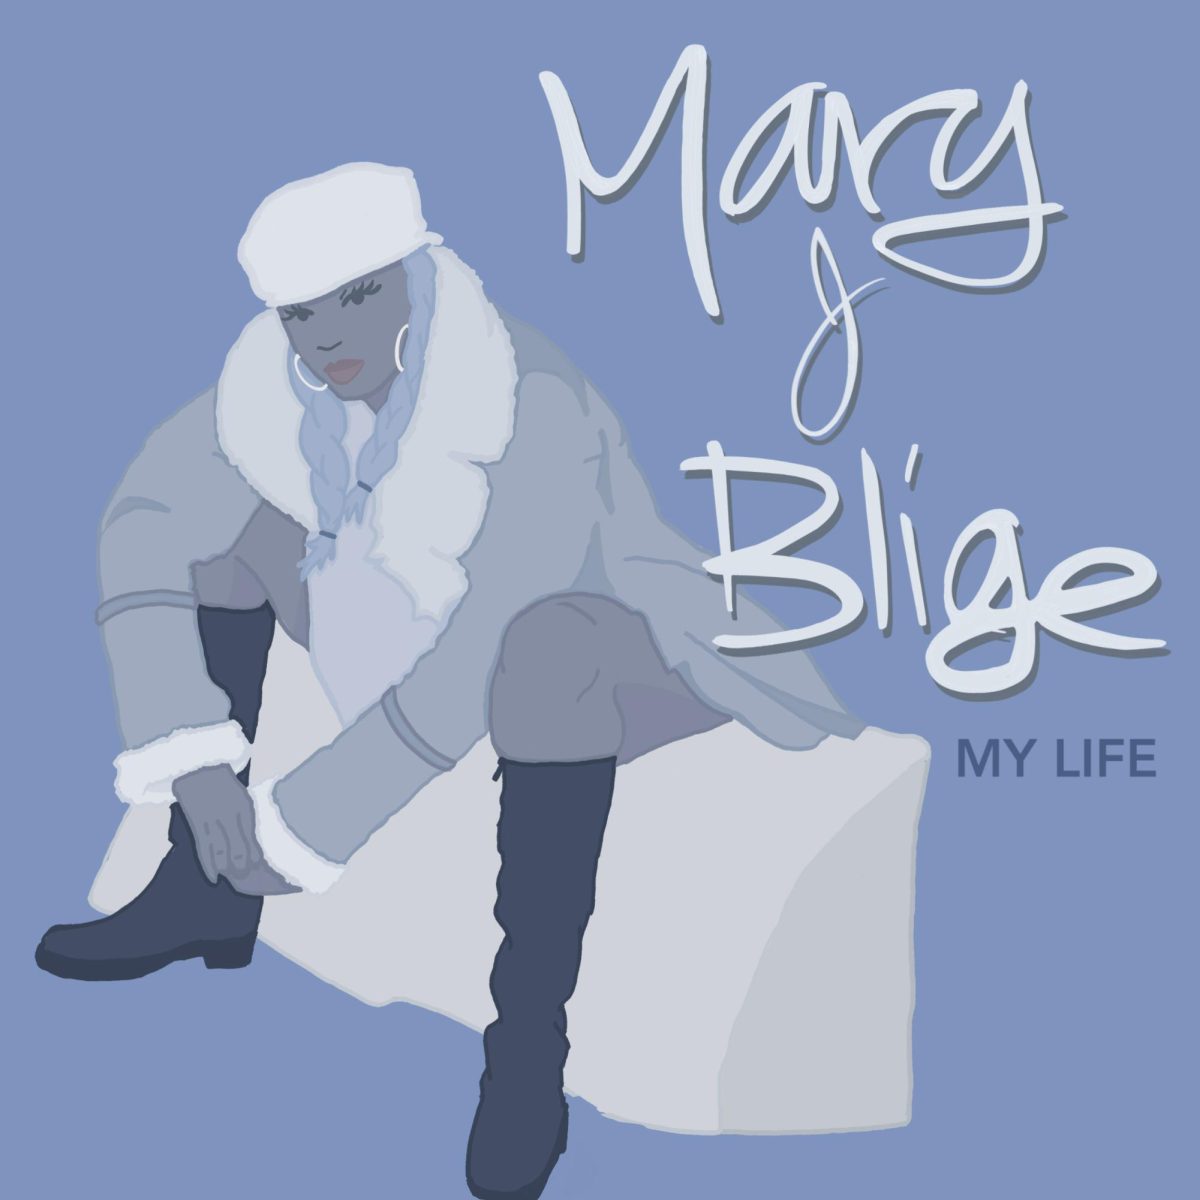 Album+of+the+week%3A+%E2%80%98My+Life%E2%80%99+by+Mary+J.+Blige